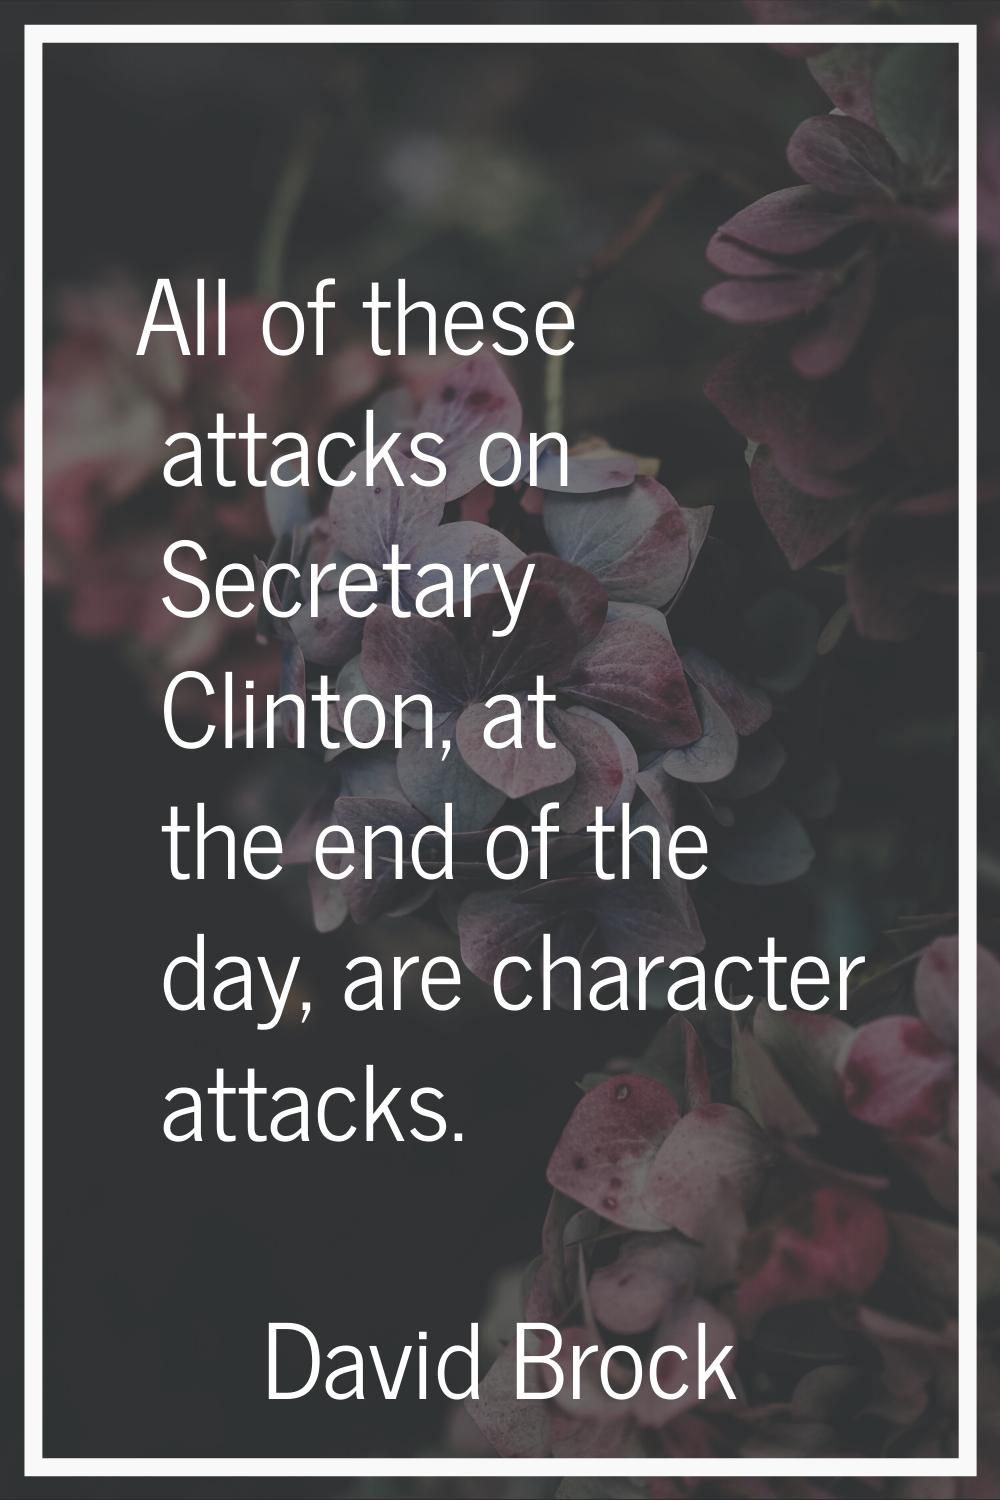 All of these attacks on Secretary Clinton, at the end of the day, are character attacks.